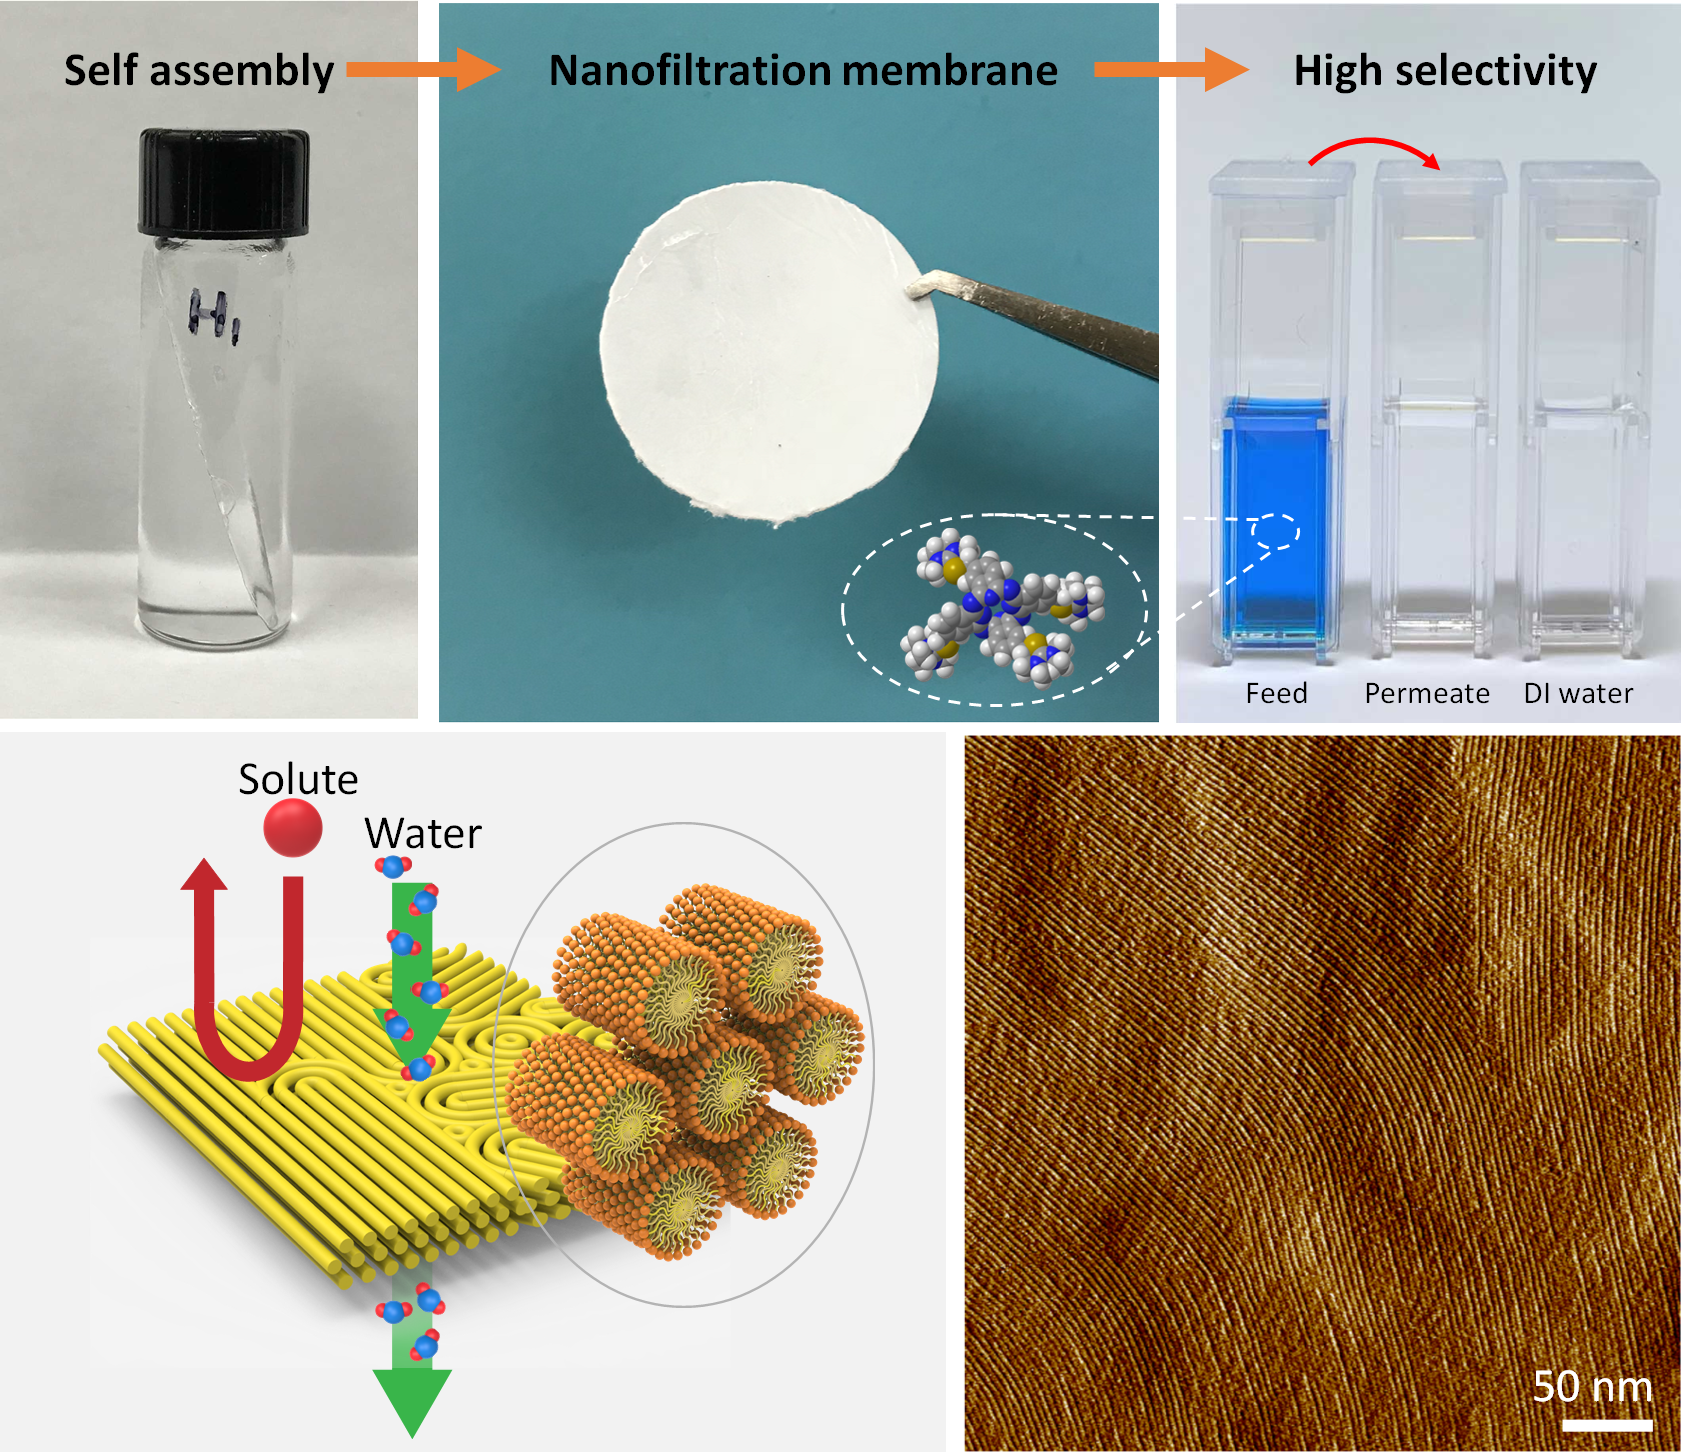 a diagram of the water filter process, from top left: self assembly, clear vial with lid, nanofiltration membrane, showing a white disk and a chemical structure, high selectivity, showing vials with different colors (feed, permeate, DI water). Bottom from left: a diagram of the microscopic structure of the filter showing water and solute movement, then a micrographic scan of the filter itself